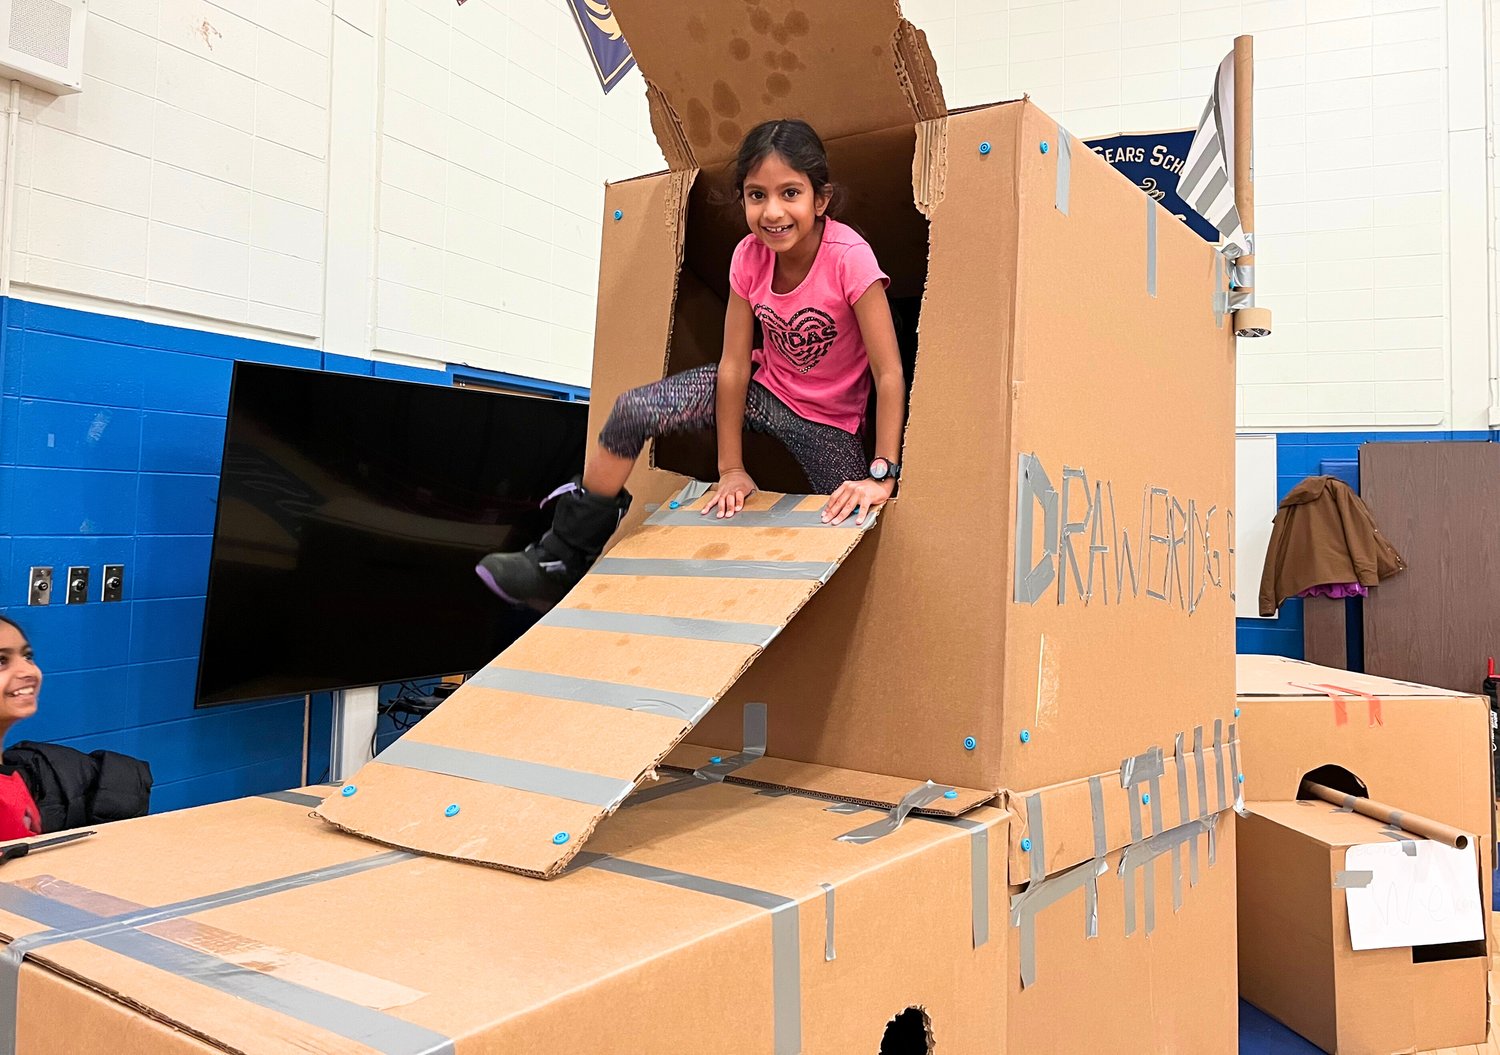 Let's Play! Cardboard Design Experience - The Alliance For Early Childhood